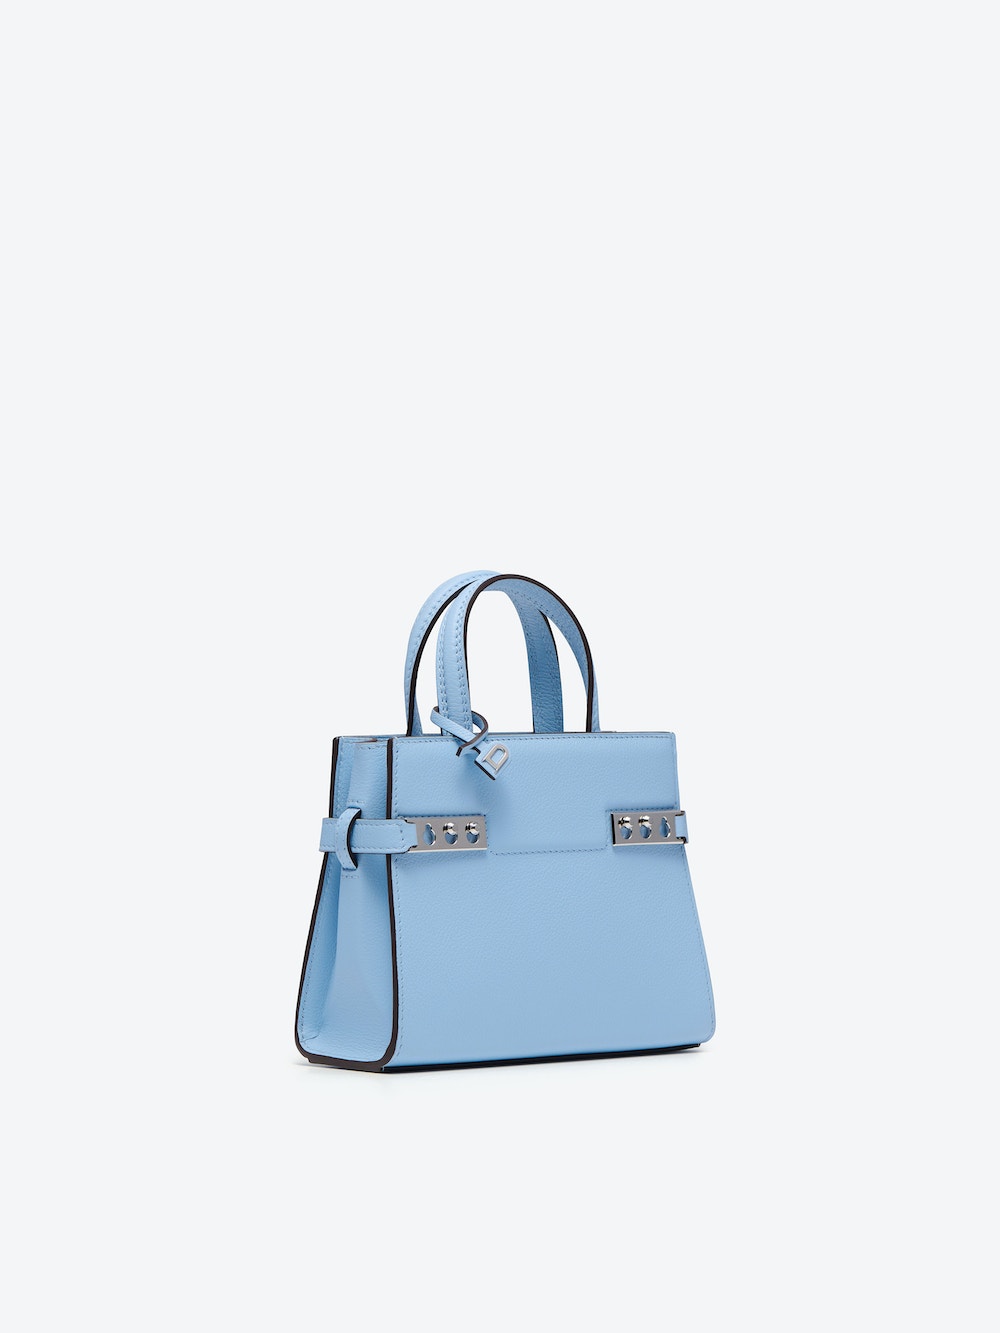 delvaux tempete outfit